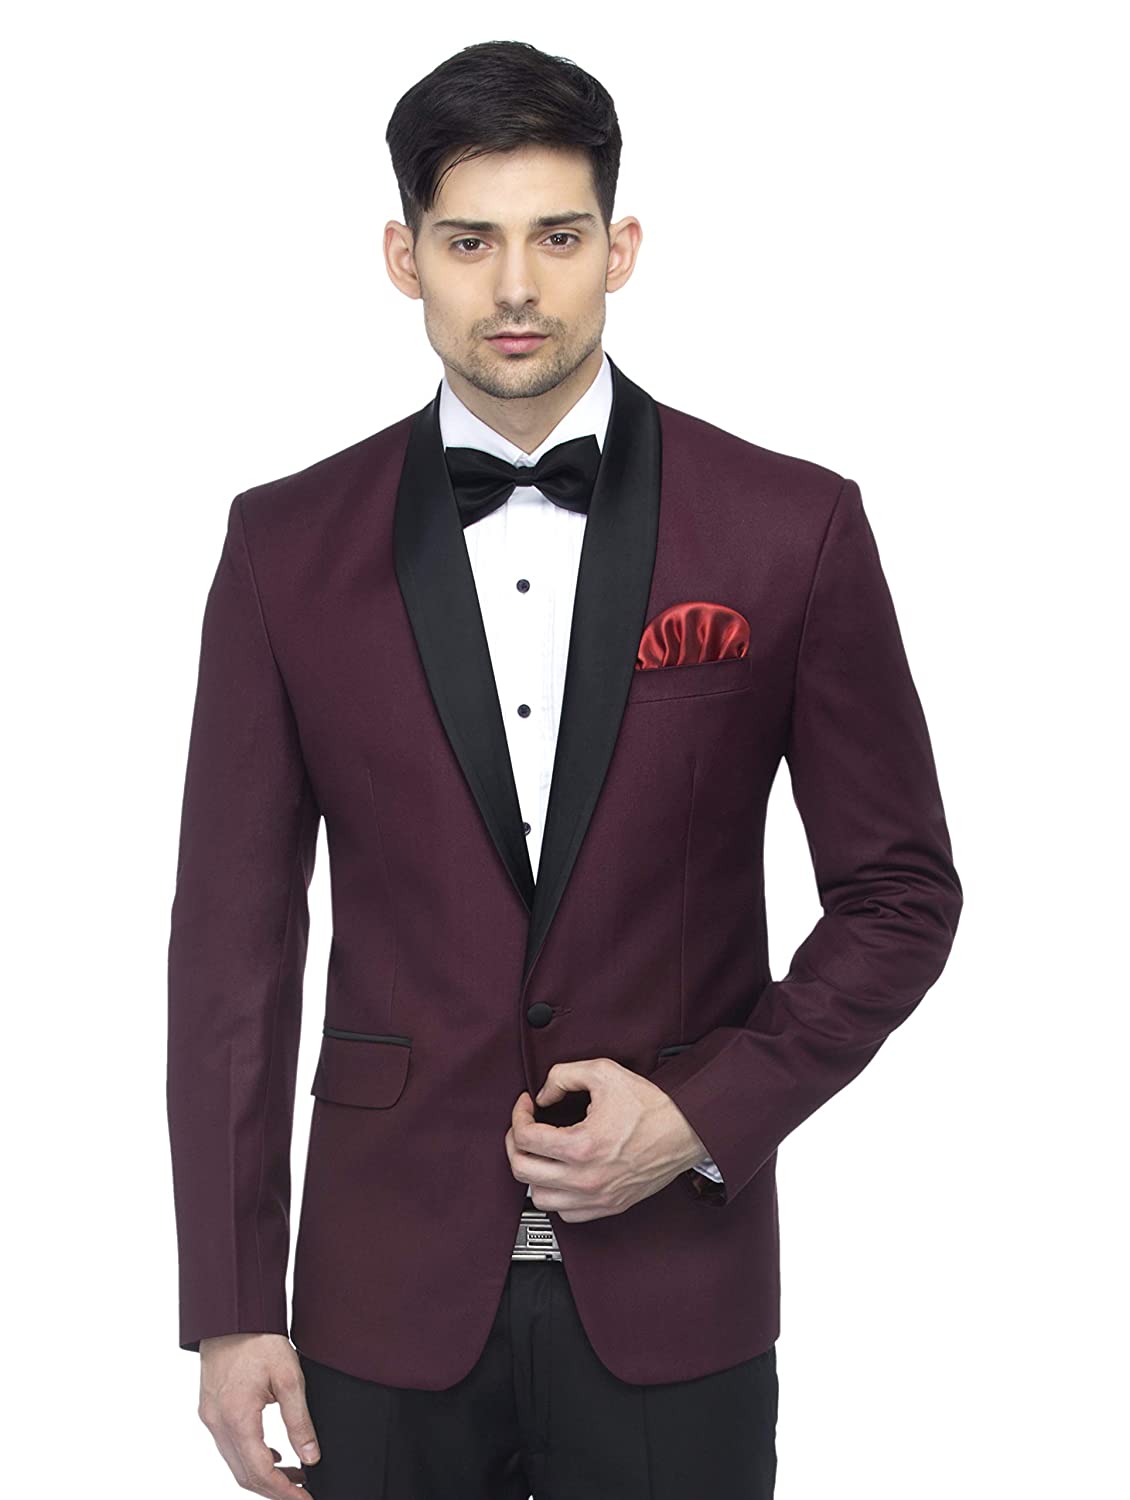 15 Best Perfect And Stylish Look In Wedding Season, Then Try These Best ...